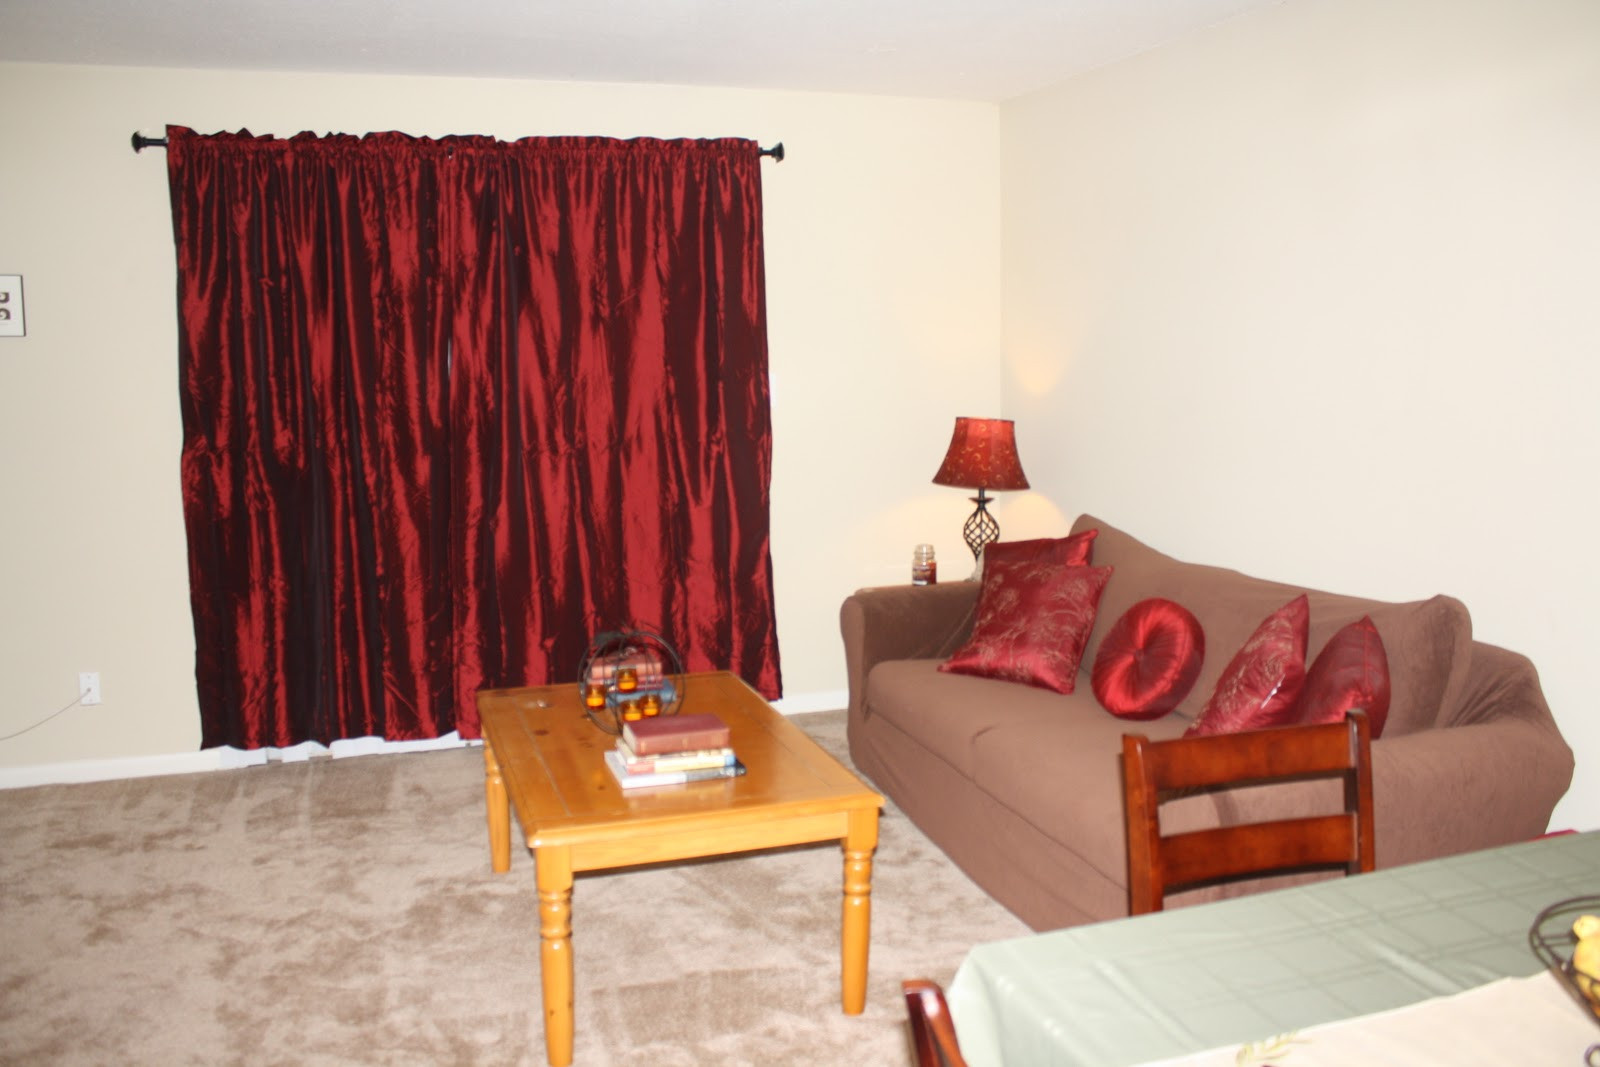 Living Room Red Curtains
 Inspiring Red Curtains In Living Room 19 Lentine